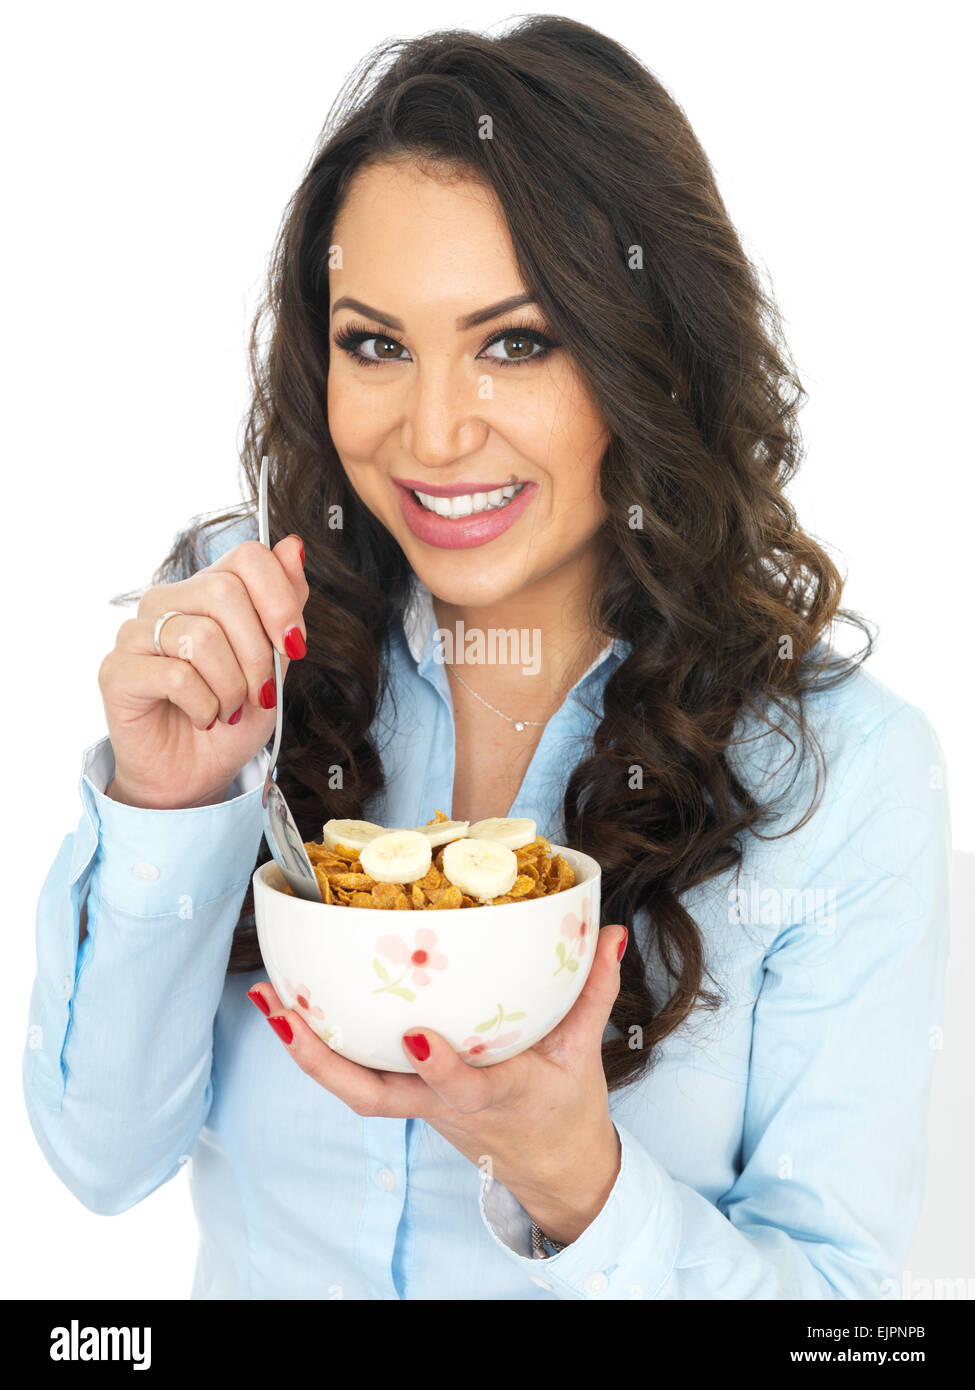 Attractive Young Woman Eating Breakfast Cereals with Banana Stock Photo